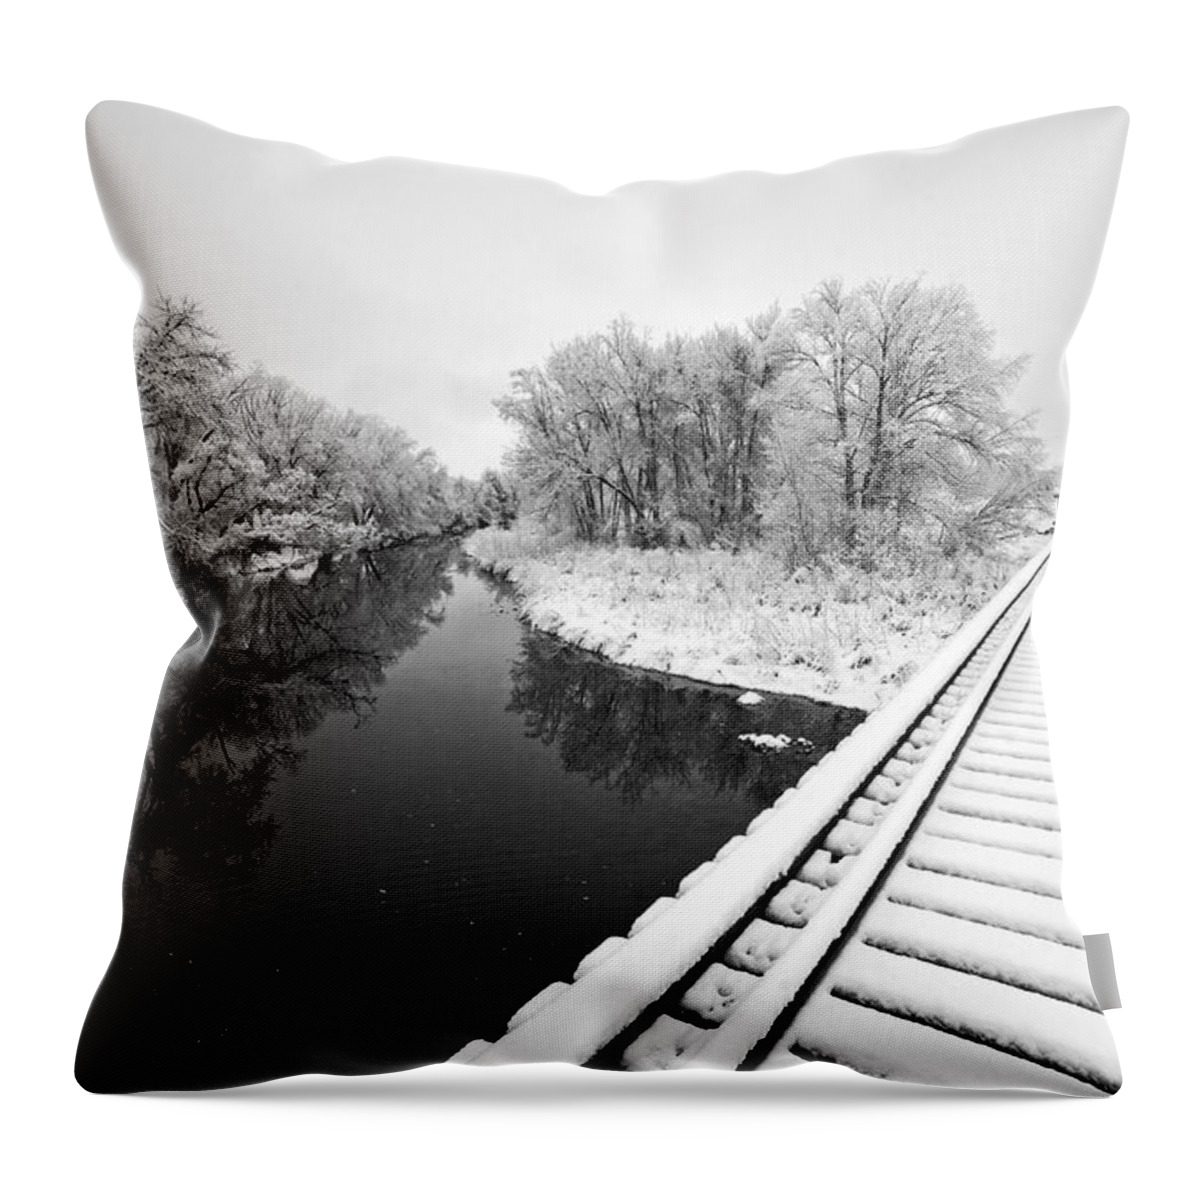 Fine Art Black And White Photography. Black And White Snow Photography.black And White Greeting Cards. Black And White Train Tracks Greeting Cards. Train Tracks In The Snow.black And White Infrared Photography. Black And White Photography. Throw Pillow featuring the photograph Frosty Morning On The Poudre by James Steele